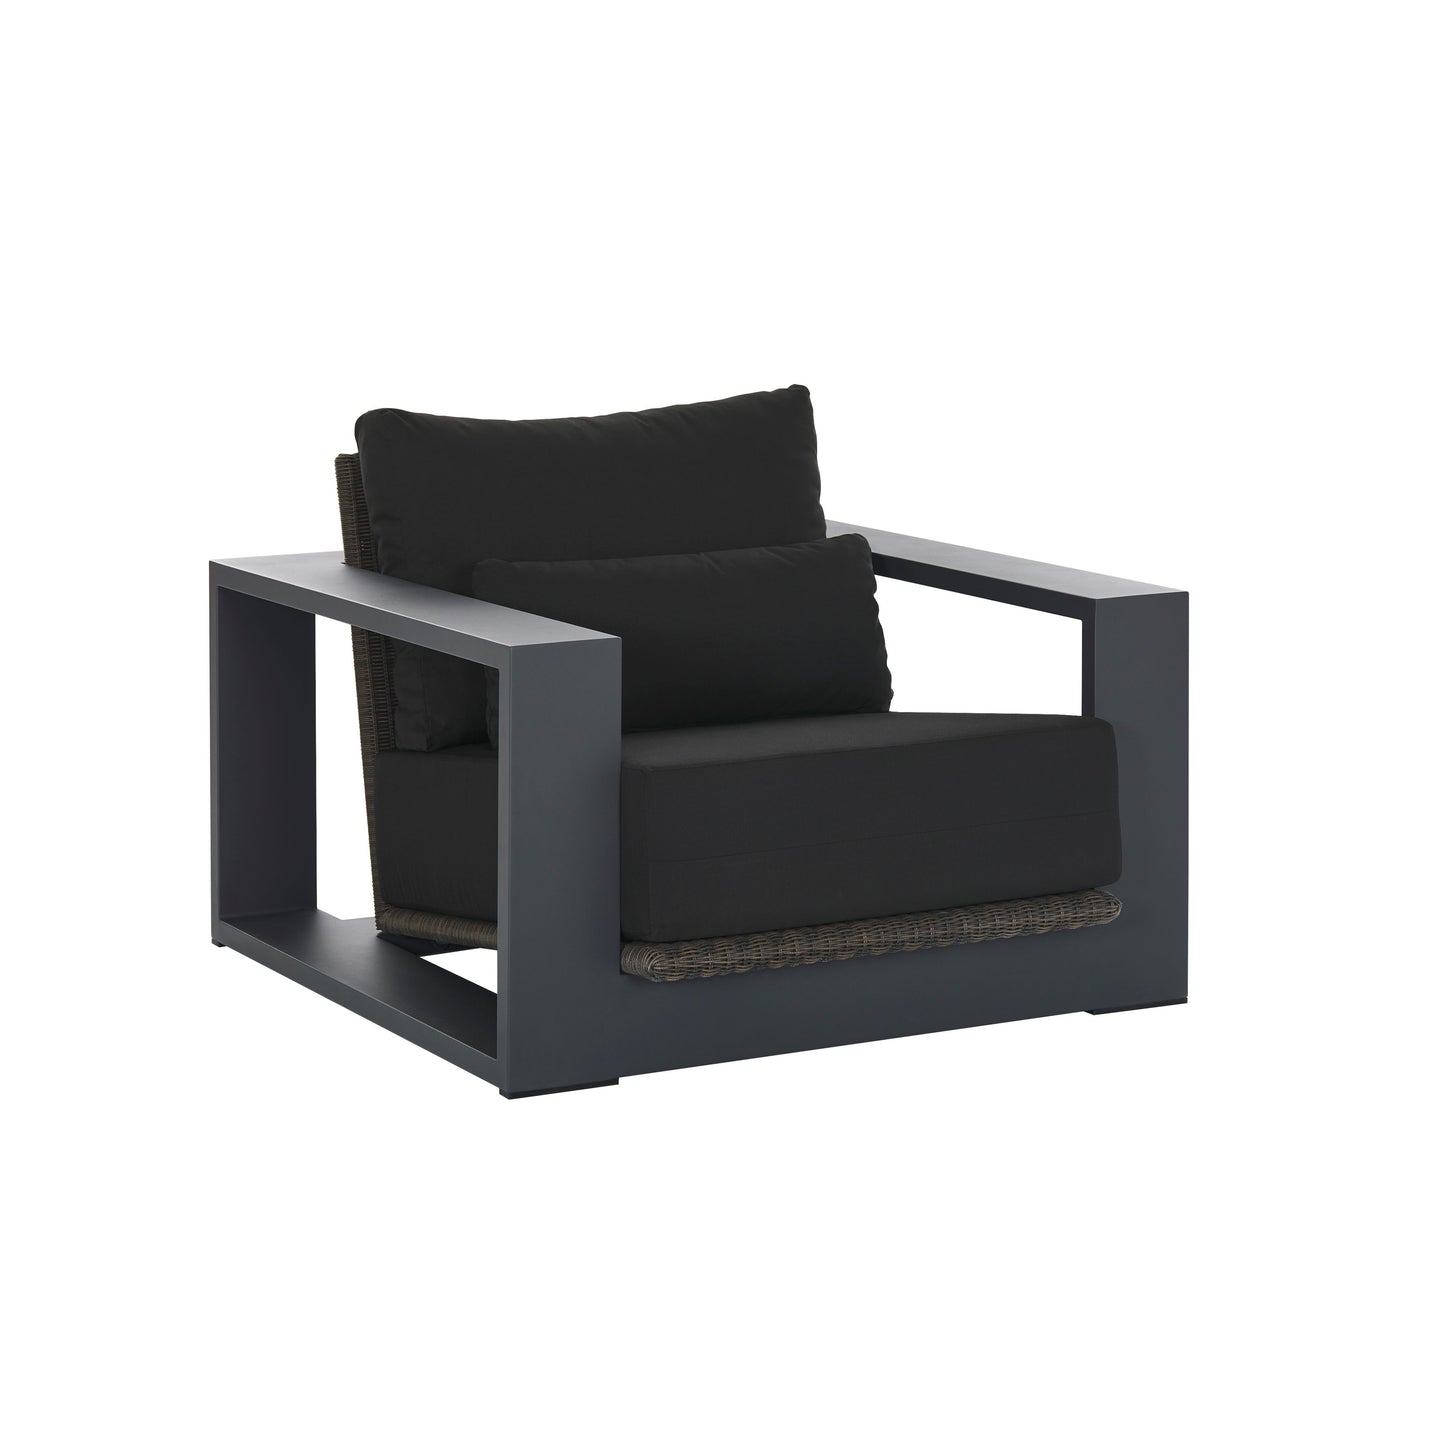 Cuba Outdoor Lounge Chair by Coco Republic (2 available)